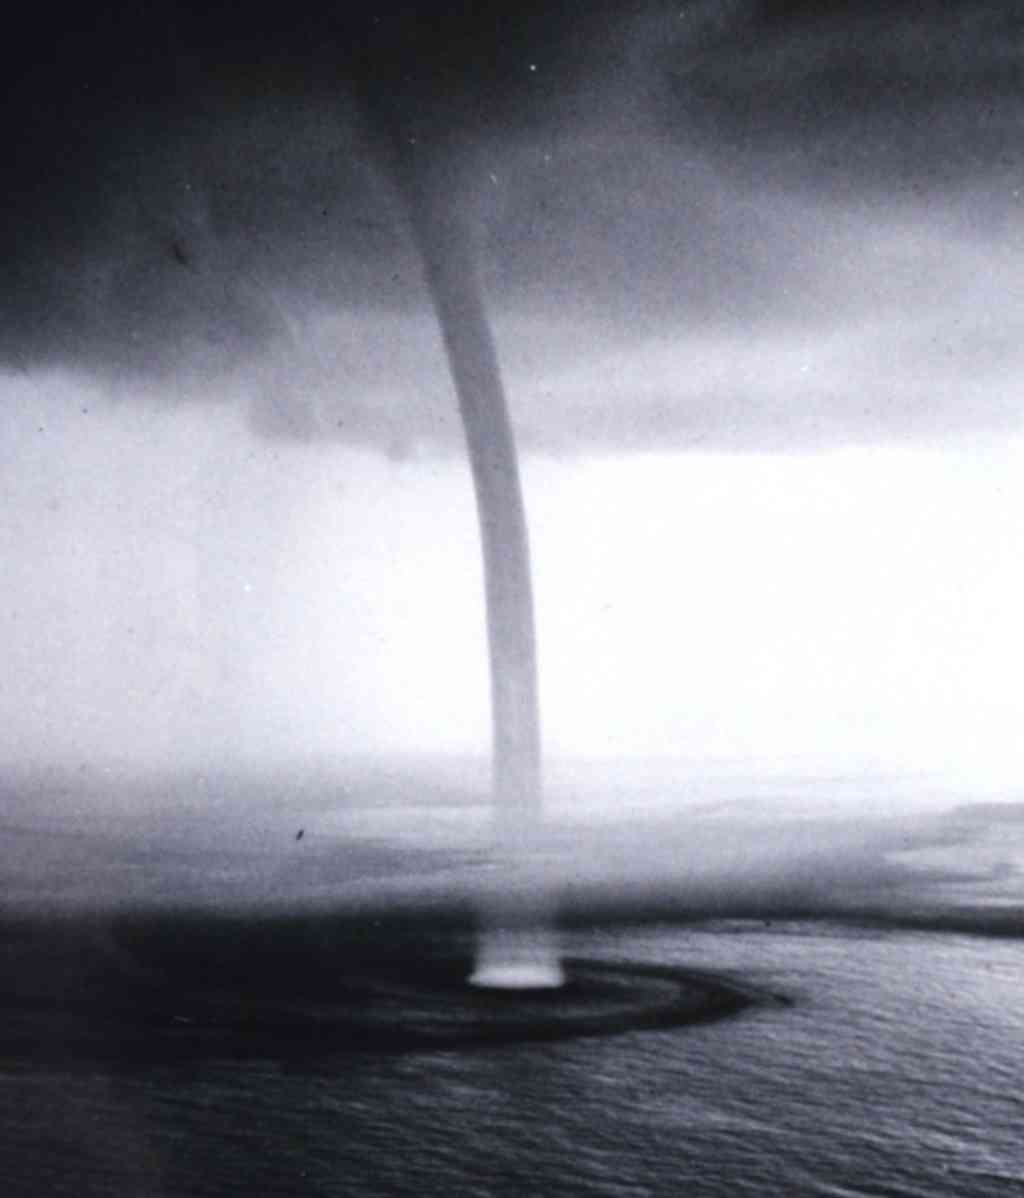 waterspout off the coast of Florida, 1969